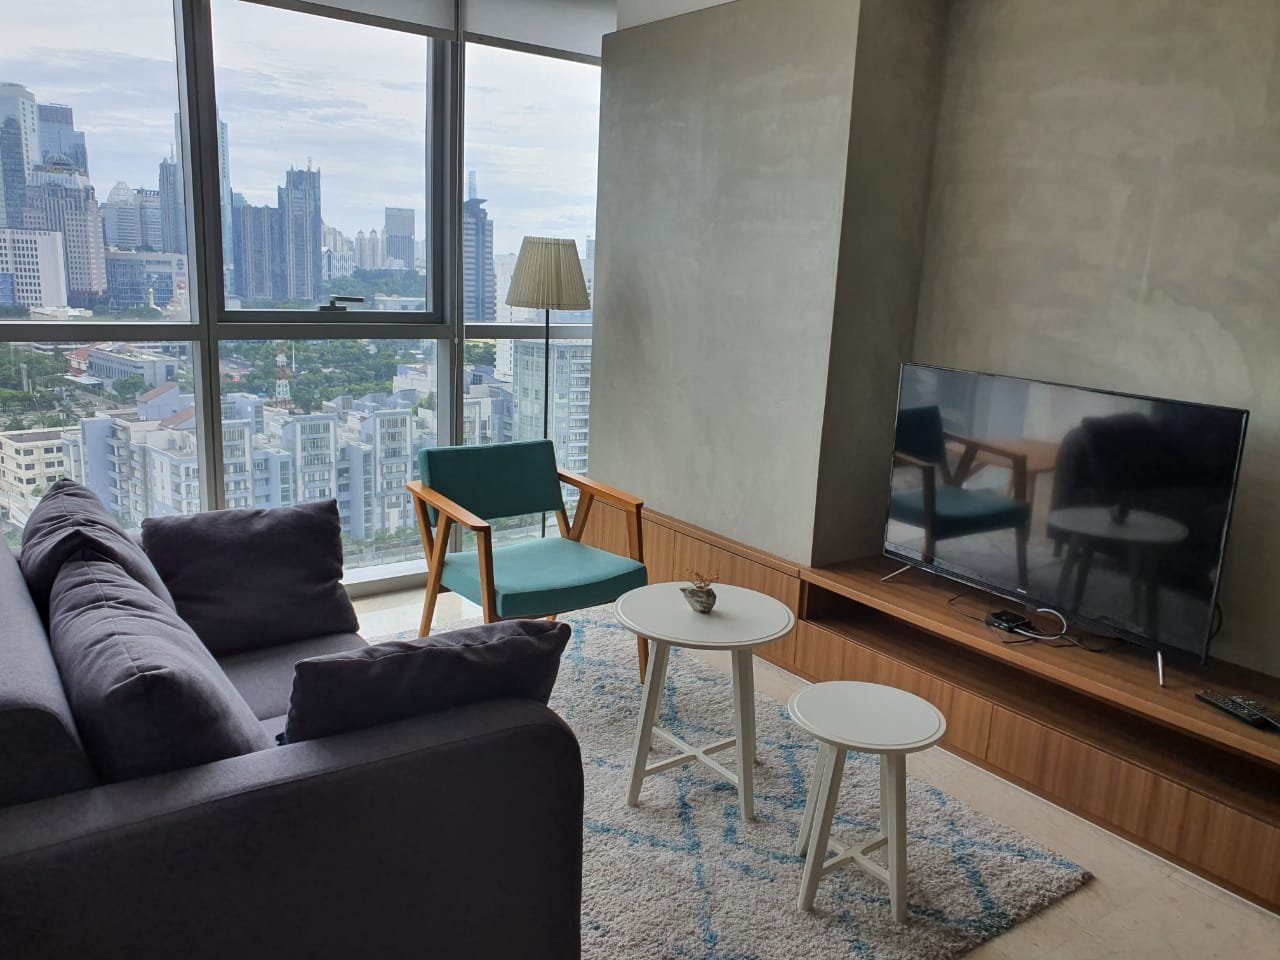 The Best Unit 2bed+2bath  Size 78sqm in a Quiet Exclusive Apartment that Make You Feel Relax Staying in the Heart of Jakarta, Ciputra World 2, Full Furnished with Excellent Interior